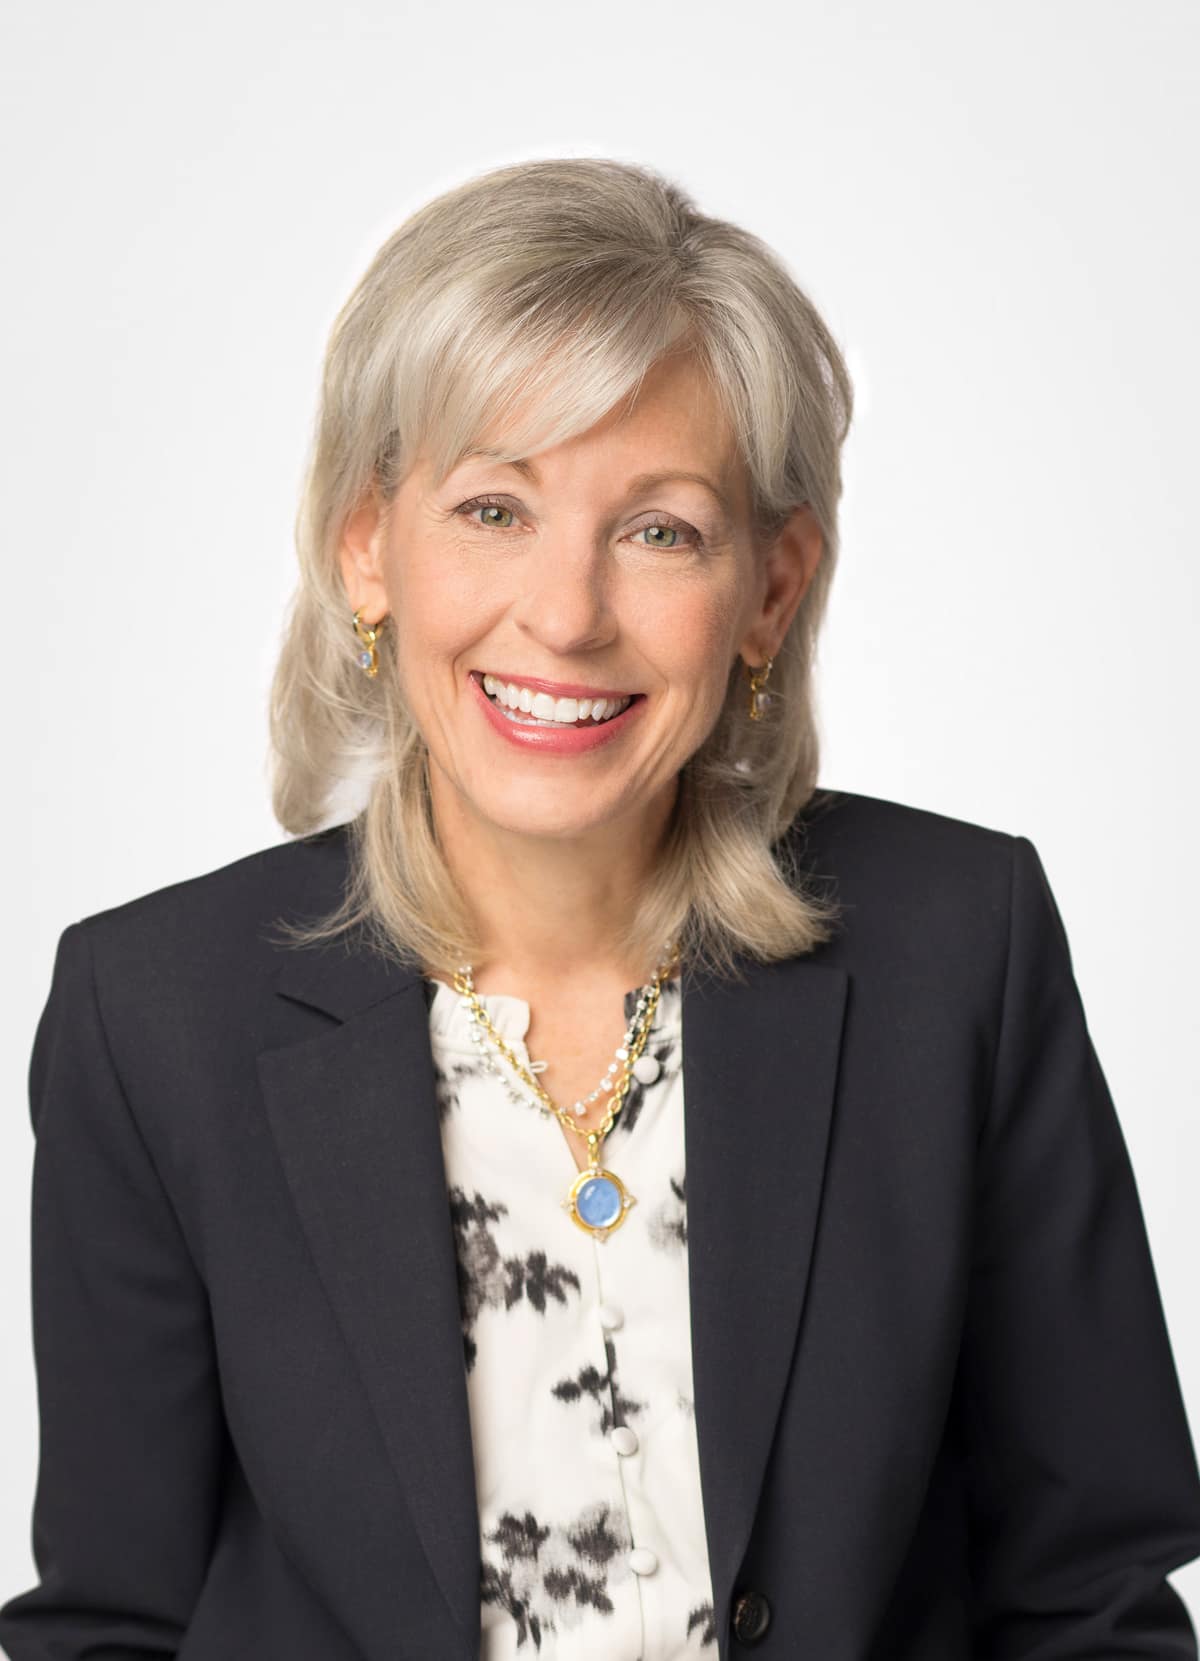 Aviation Business Veteran Leanne Caret Joins Embry-Riddle Board of Trustees